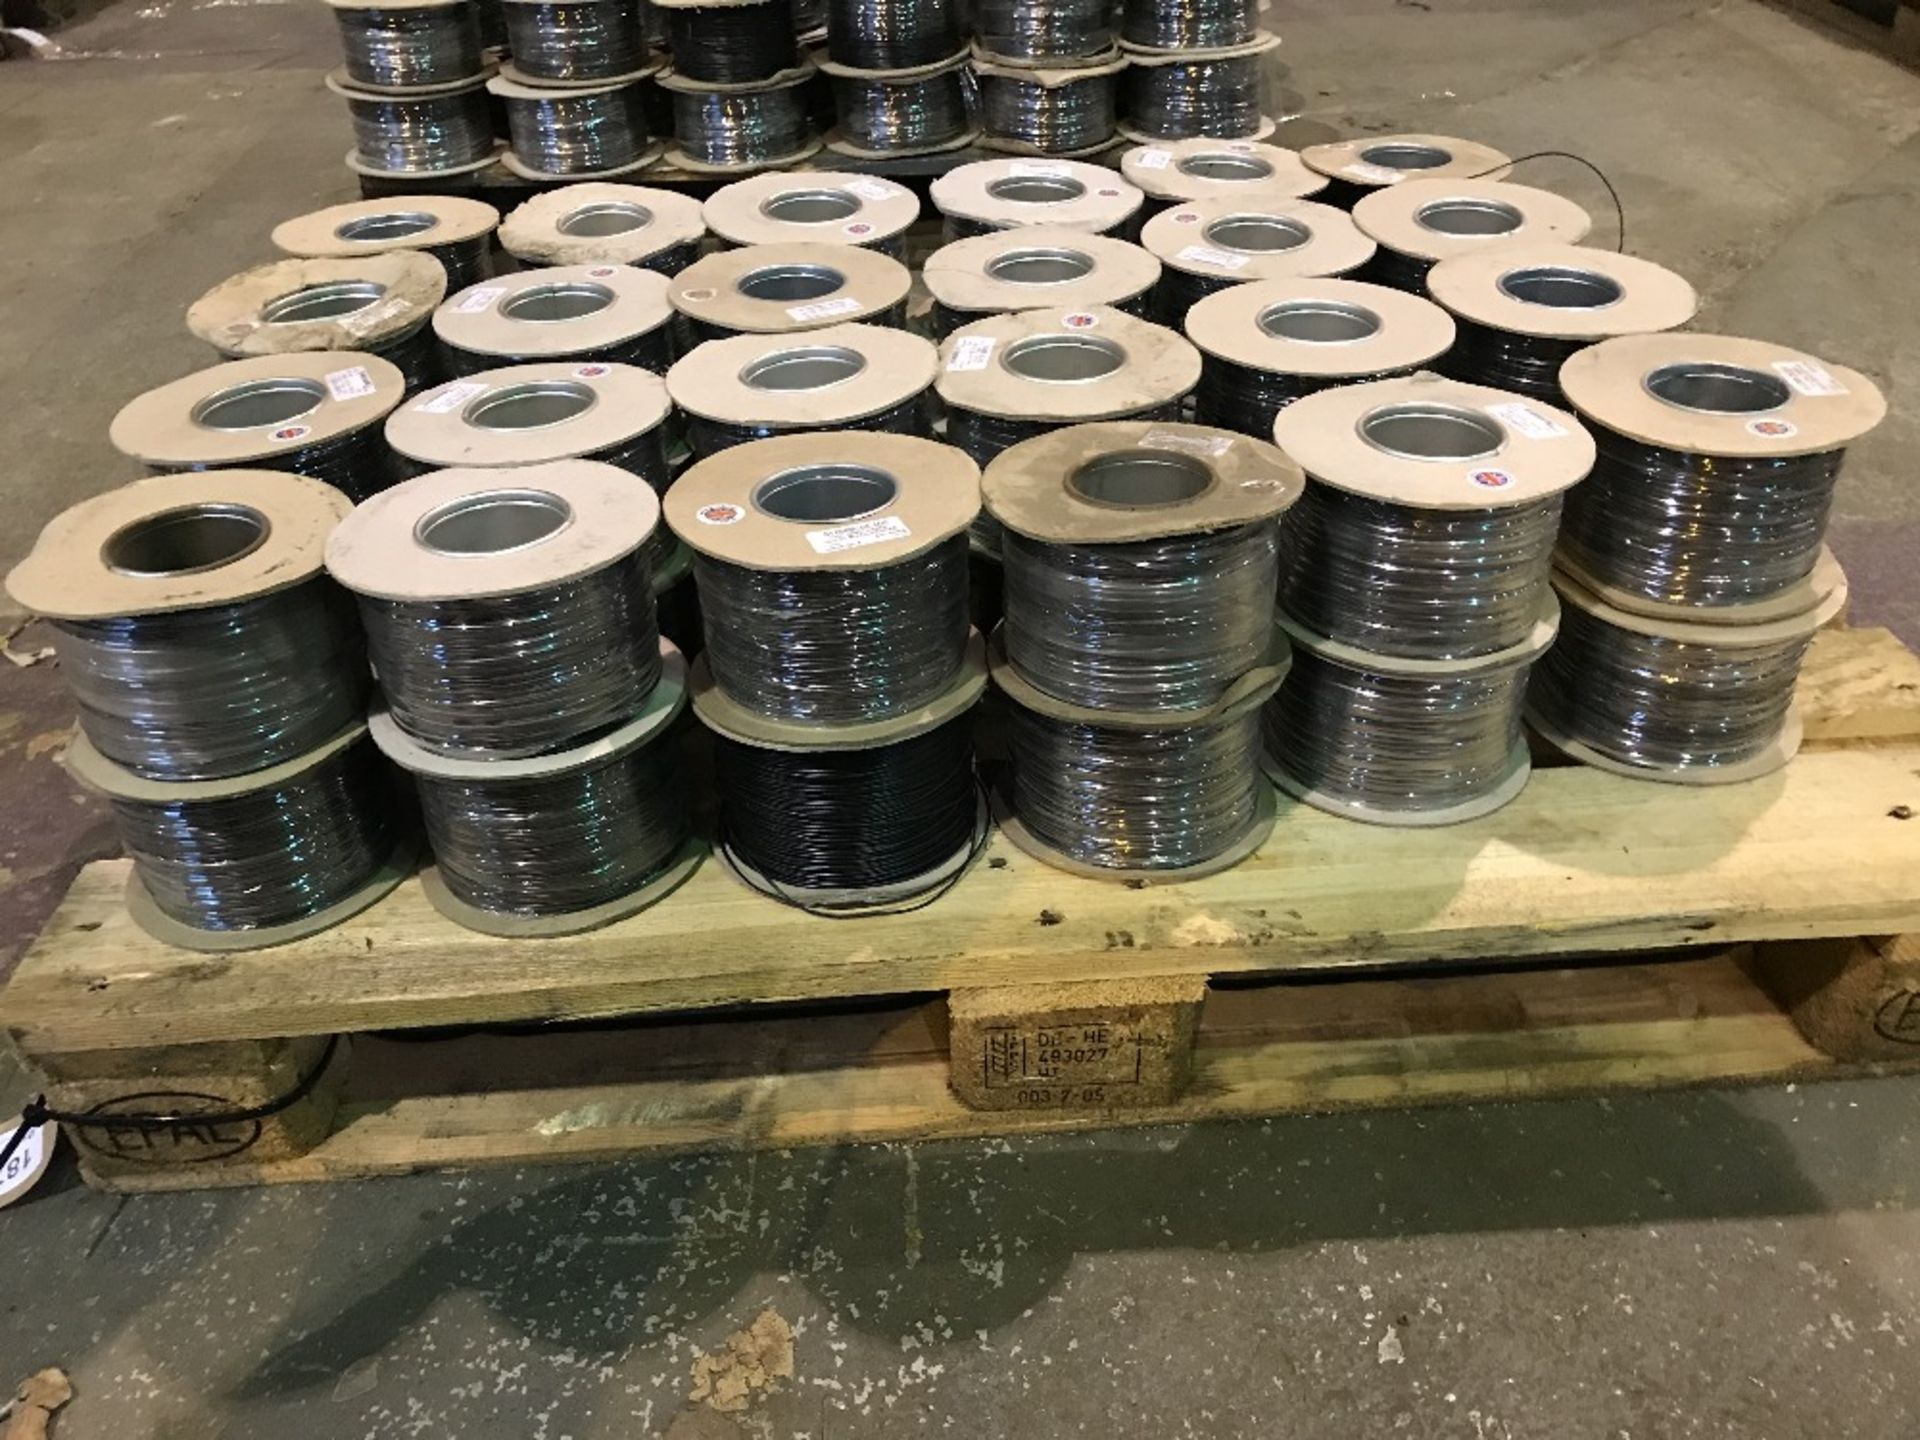 Approximately (48) Spools of 100 Metre Various Size and Colour S1208B Thin Wall Electrical Cable - Image 2 of 3